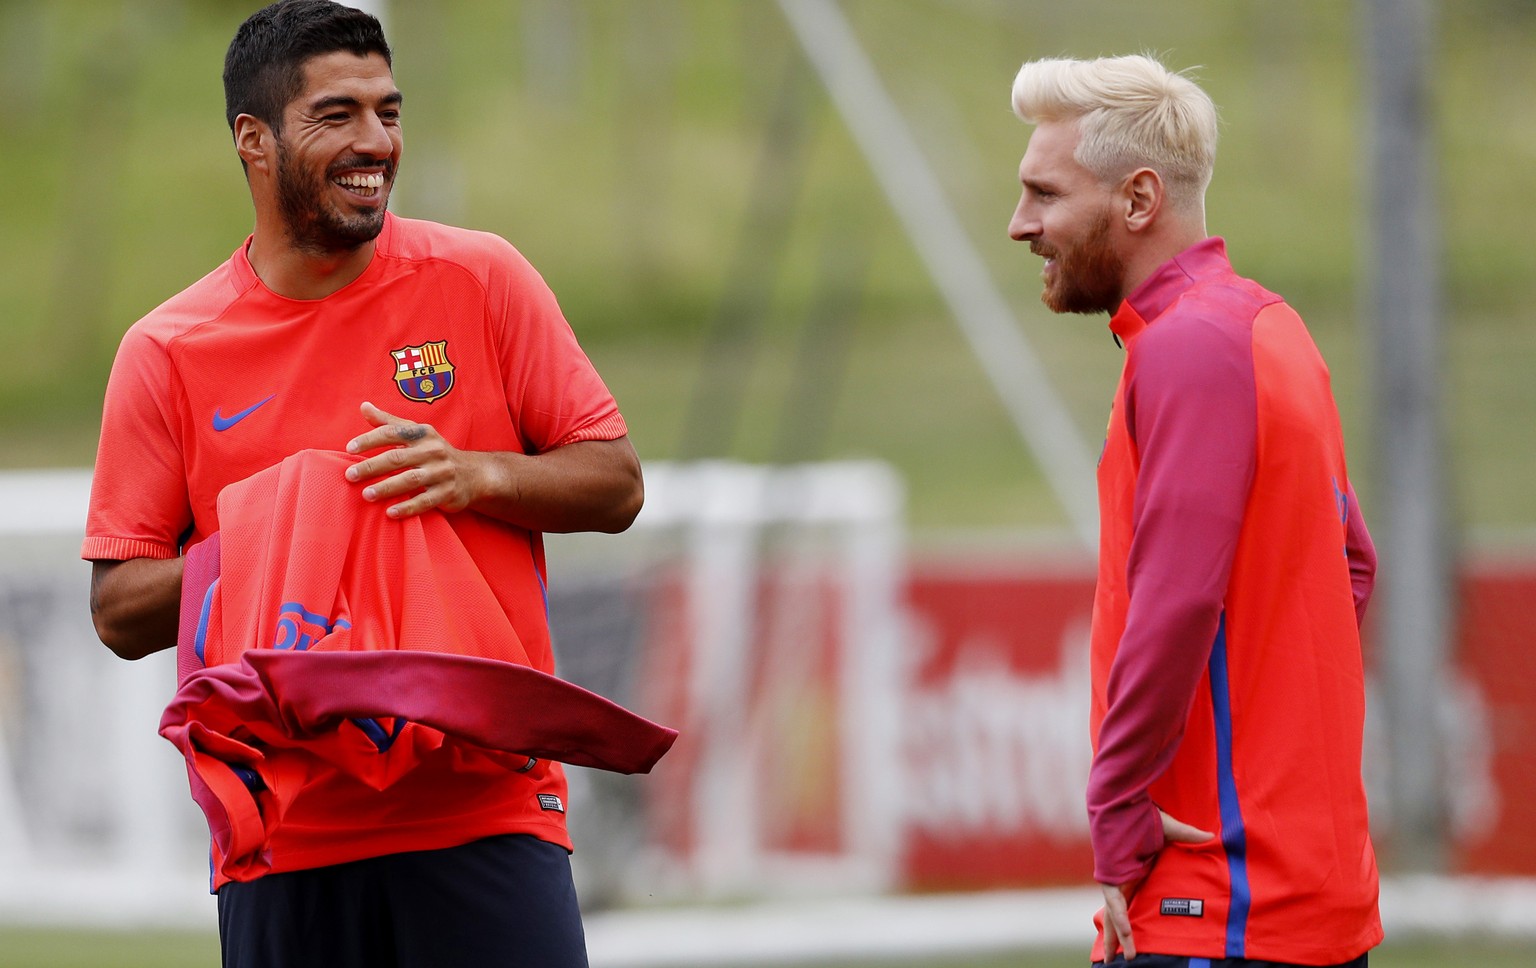 Britain Football Soccer - FC Barcelona Training - St Georges Park National Football Centre, Burton-upon-Trent - 25/7/16
FC Barcelona&#039;s Lionel Messi (R) and Luis Suarez during training
Reuters / ...